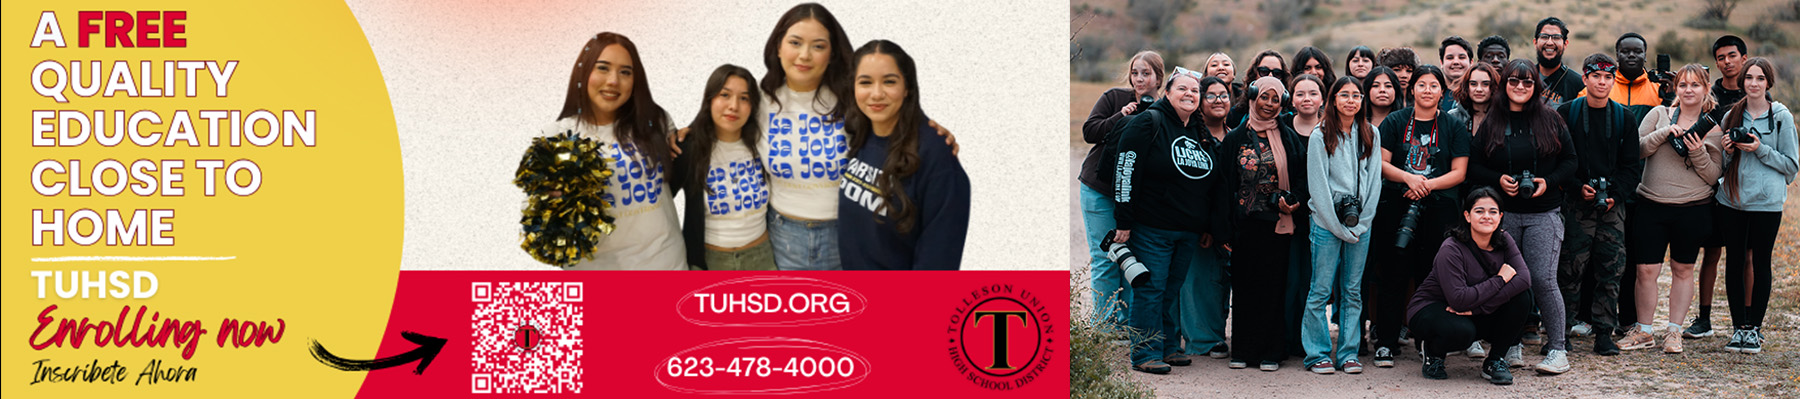 A free quality education close to home - TUHSD Enrolling now | Inscribete Ahora - tuhsd.org - 623-478-4000 | Group of happy students outside